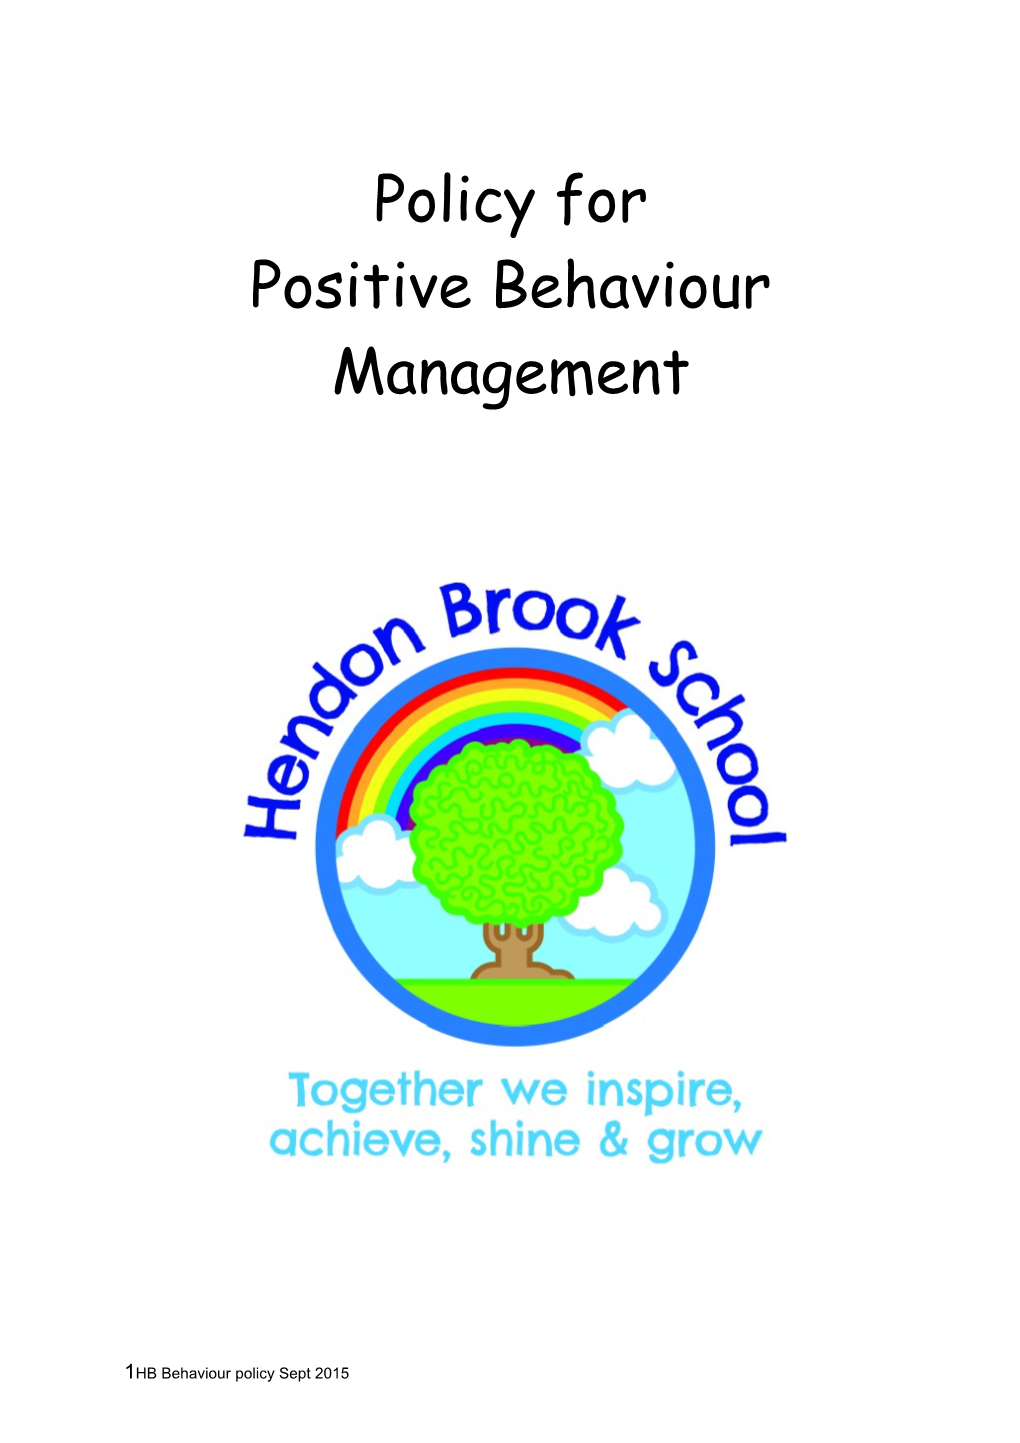 Policy for Positive Behaviour Management